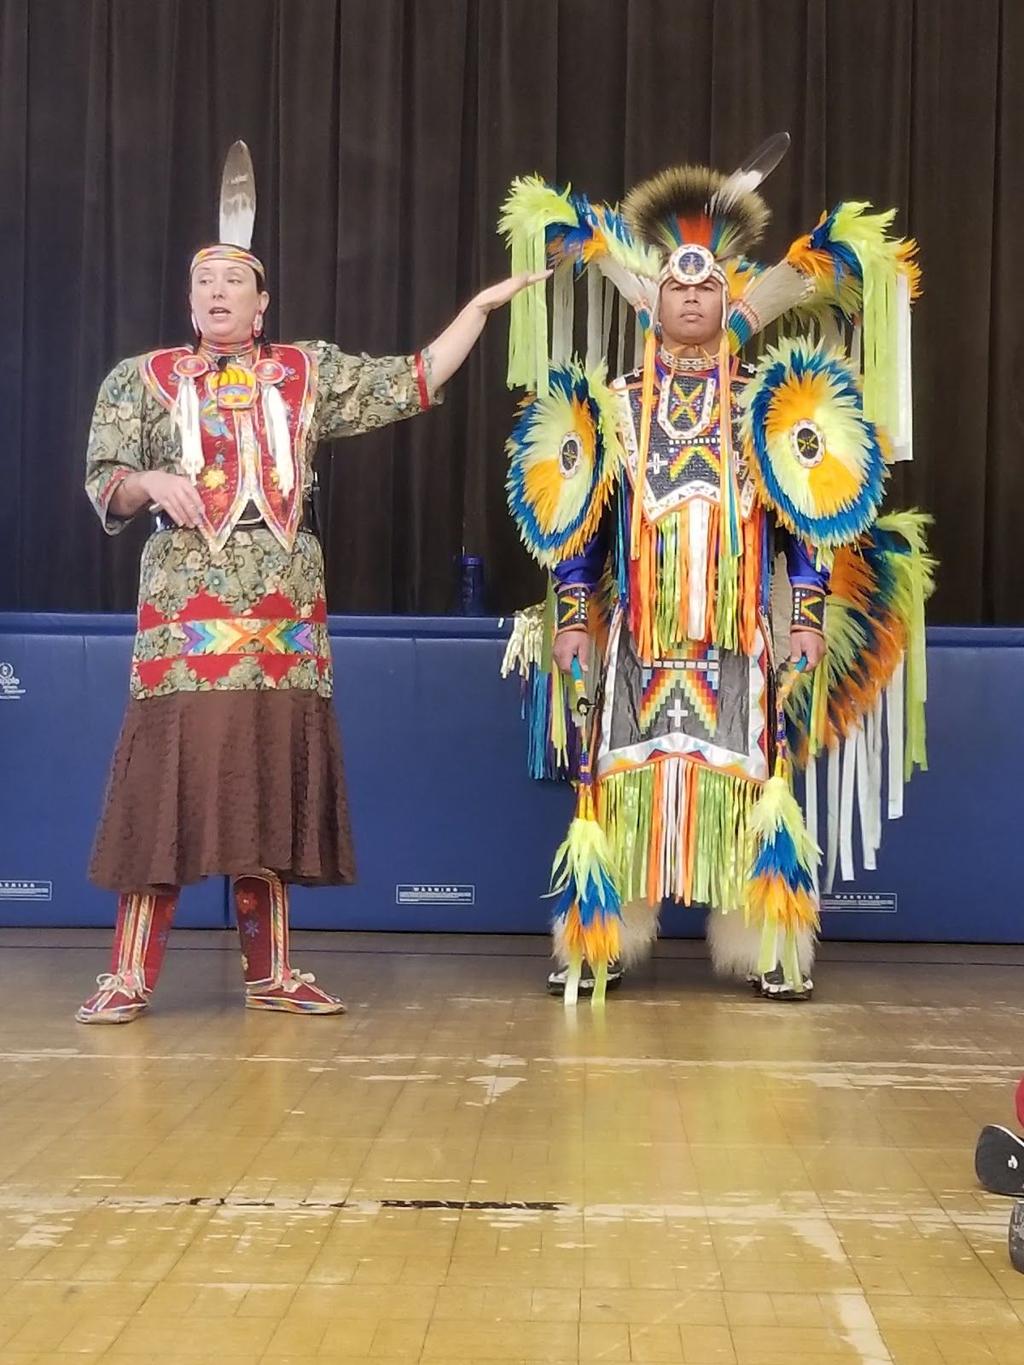 Tribal Visions: On November 29 th, the whole school went to a performance by Derek and Naomi who are Haudenosaunee from the Brantford area.